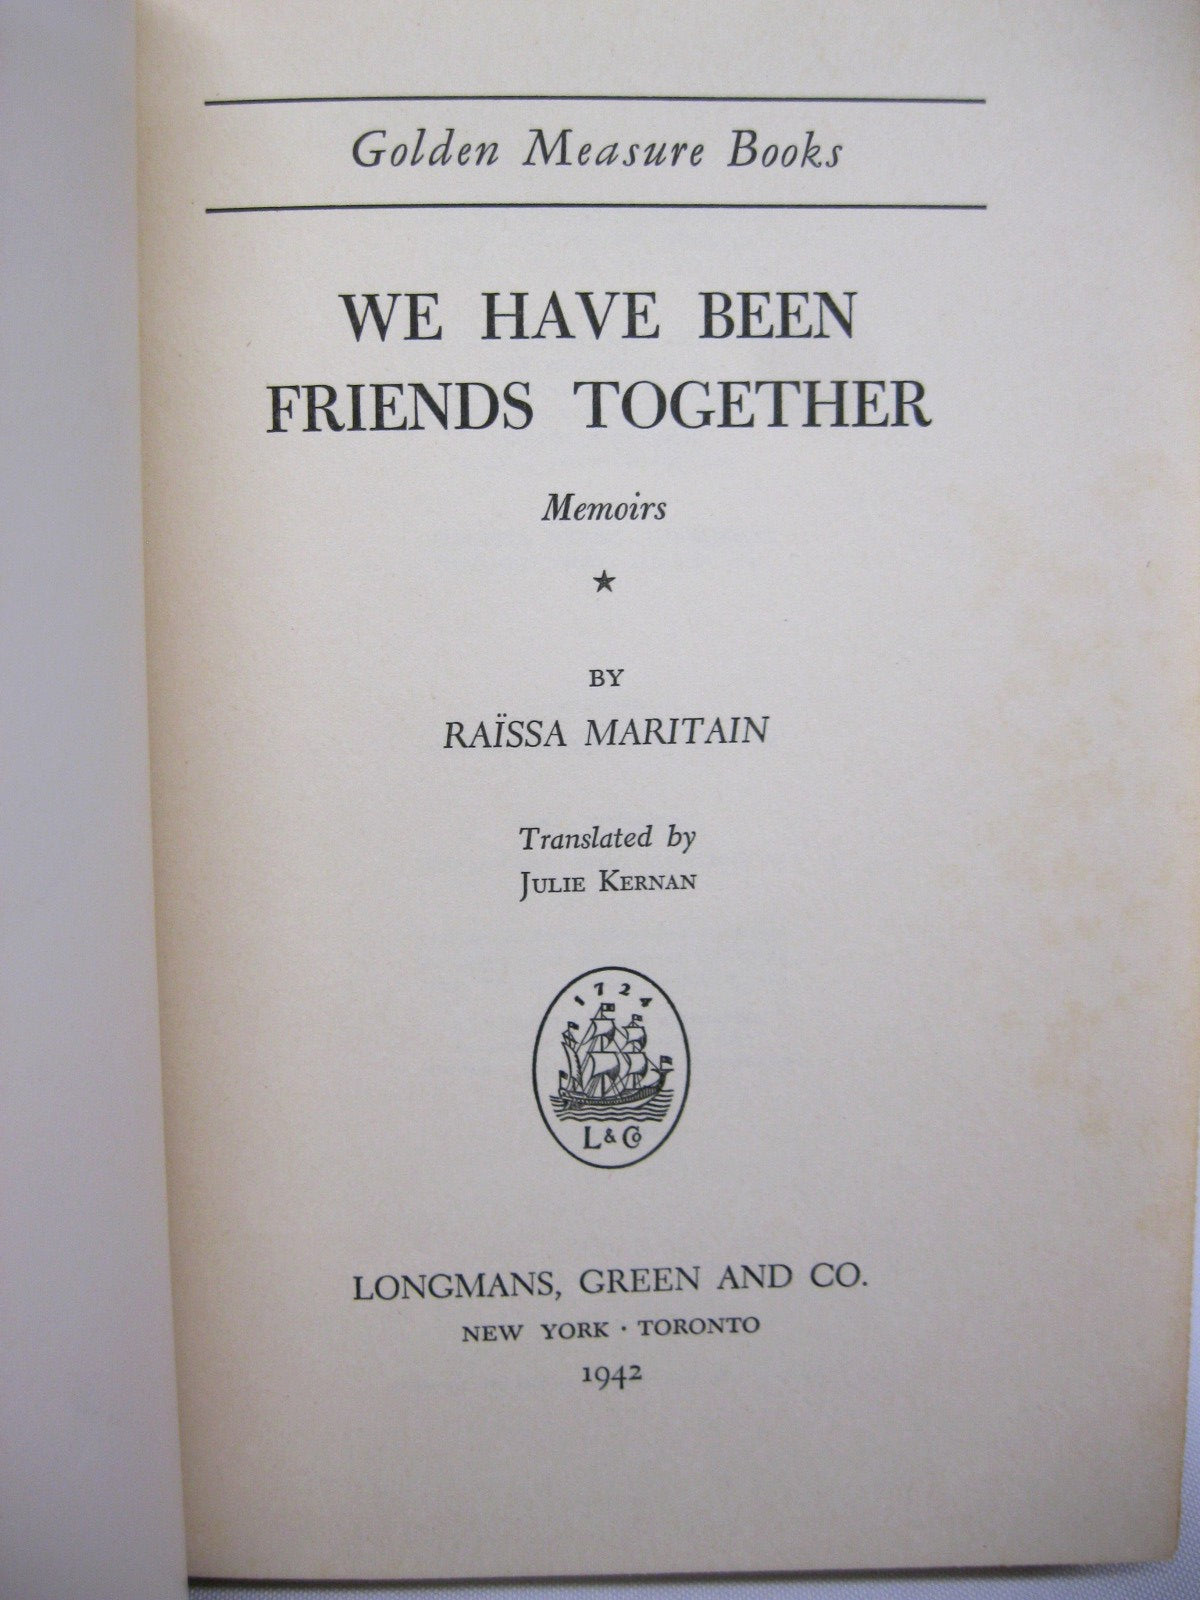 We Have Been Friends Together by Raïssa Maritain